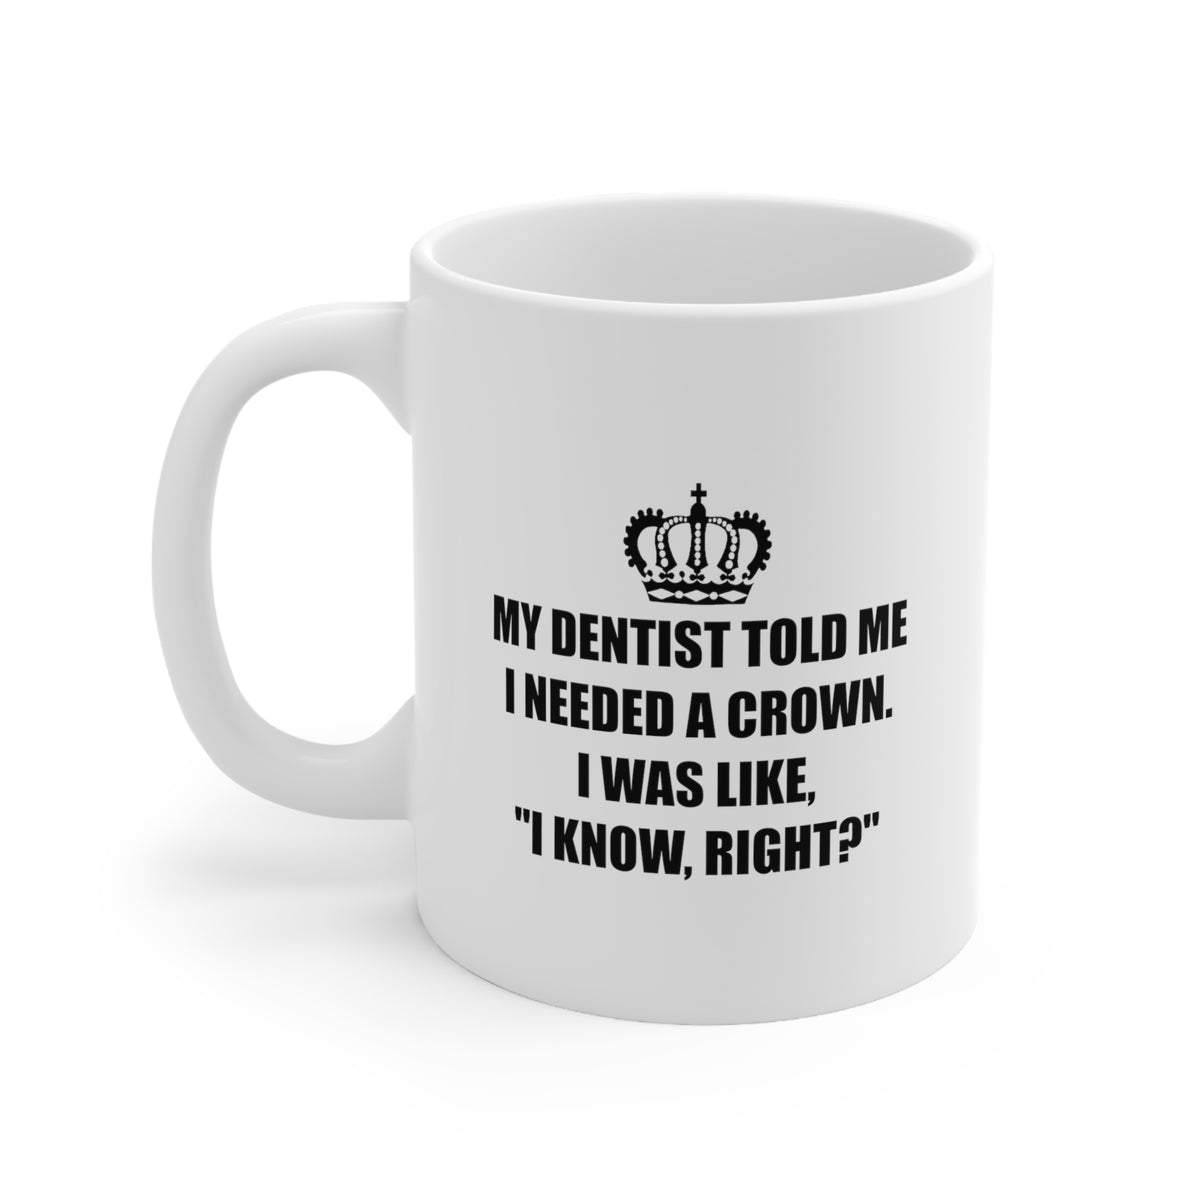 My Dentist Told Me I Needed A Crown. I Was Like, “I Know, Right?” - Perfect Tea Cup & Coffee Mug For Dentist